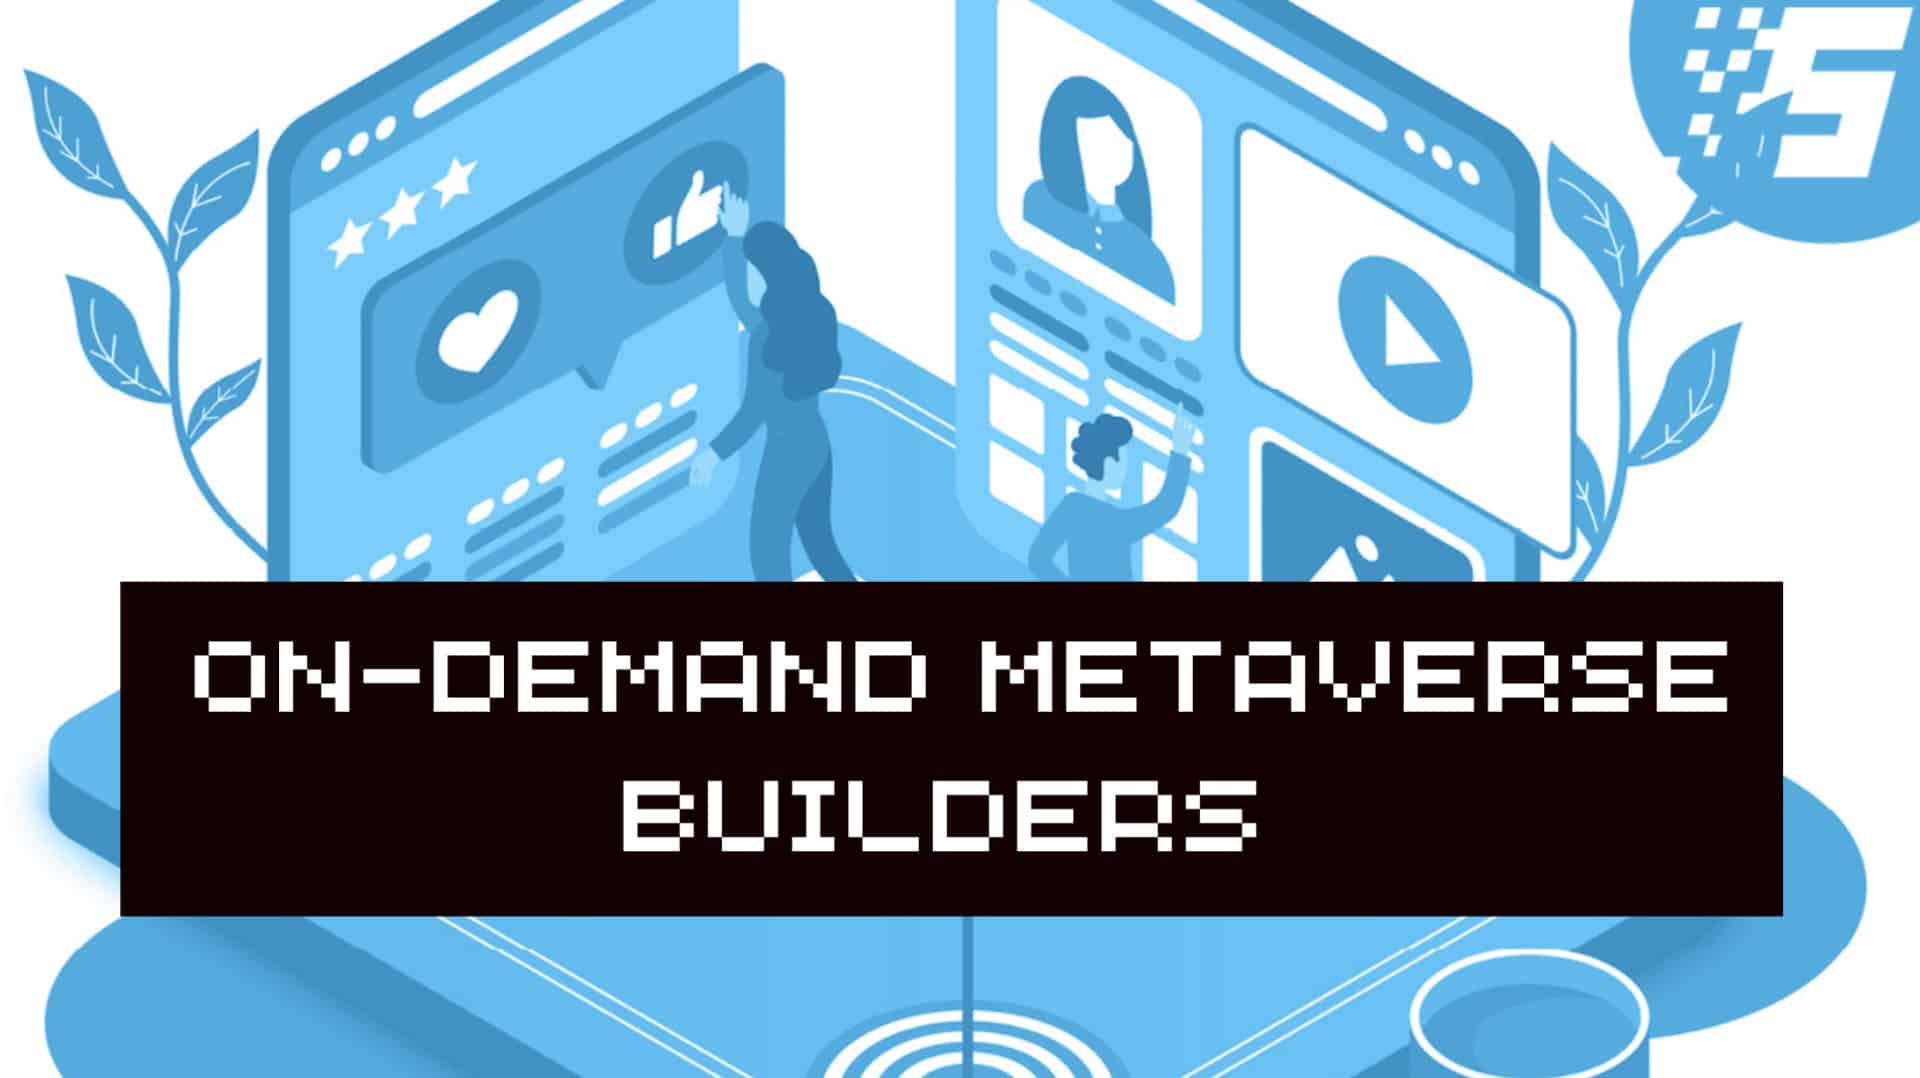  metaverse on-demand sandstorm world virtual partners launches 